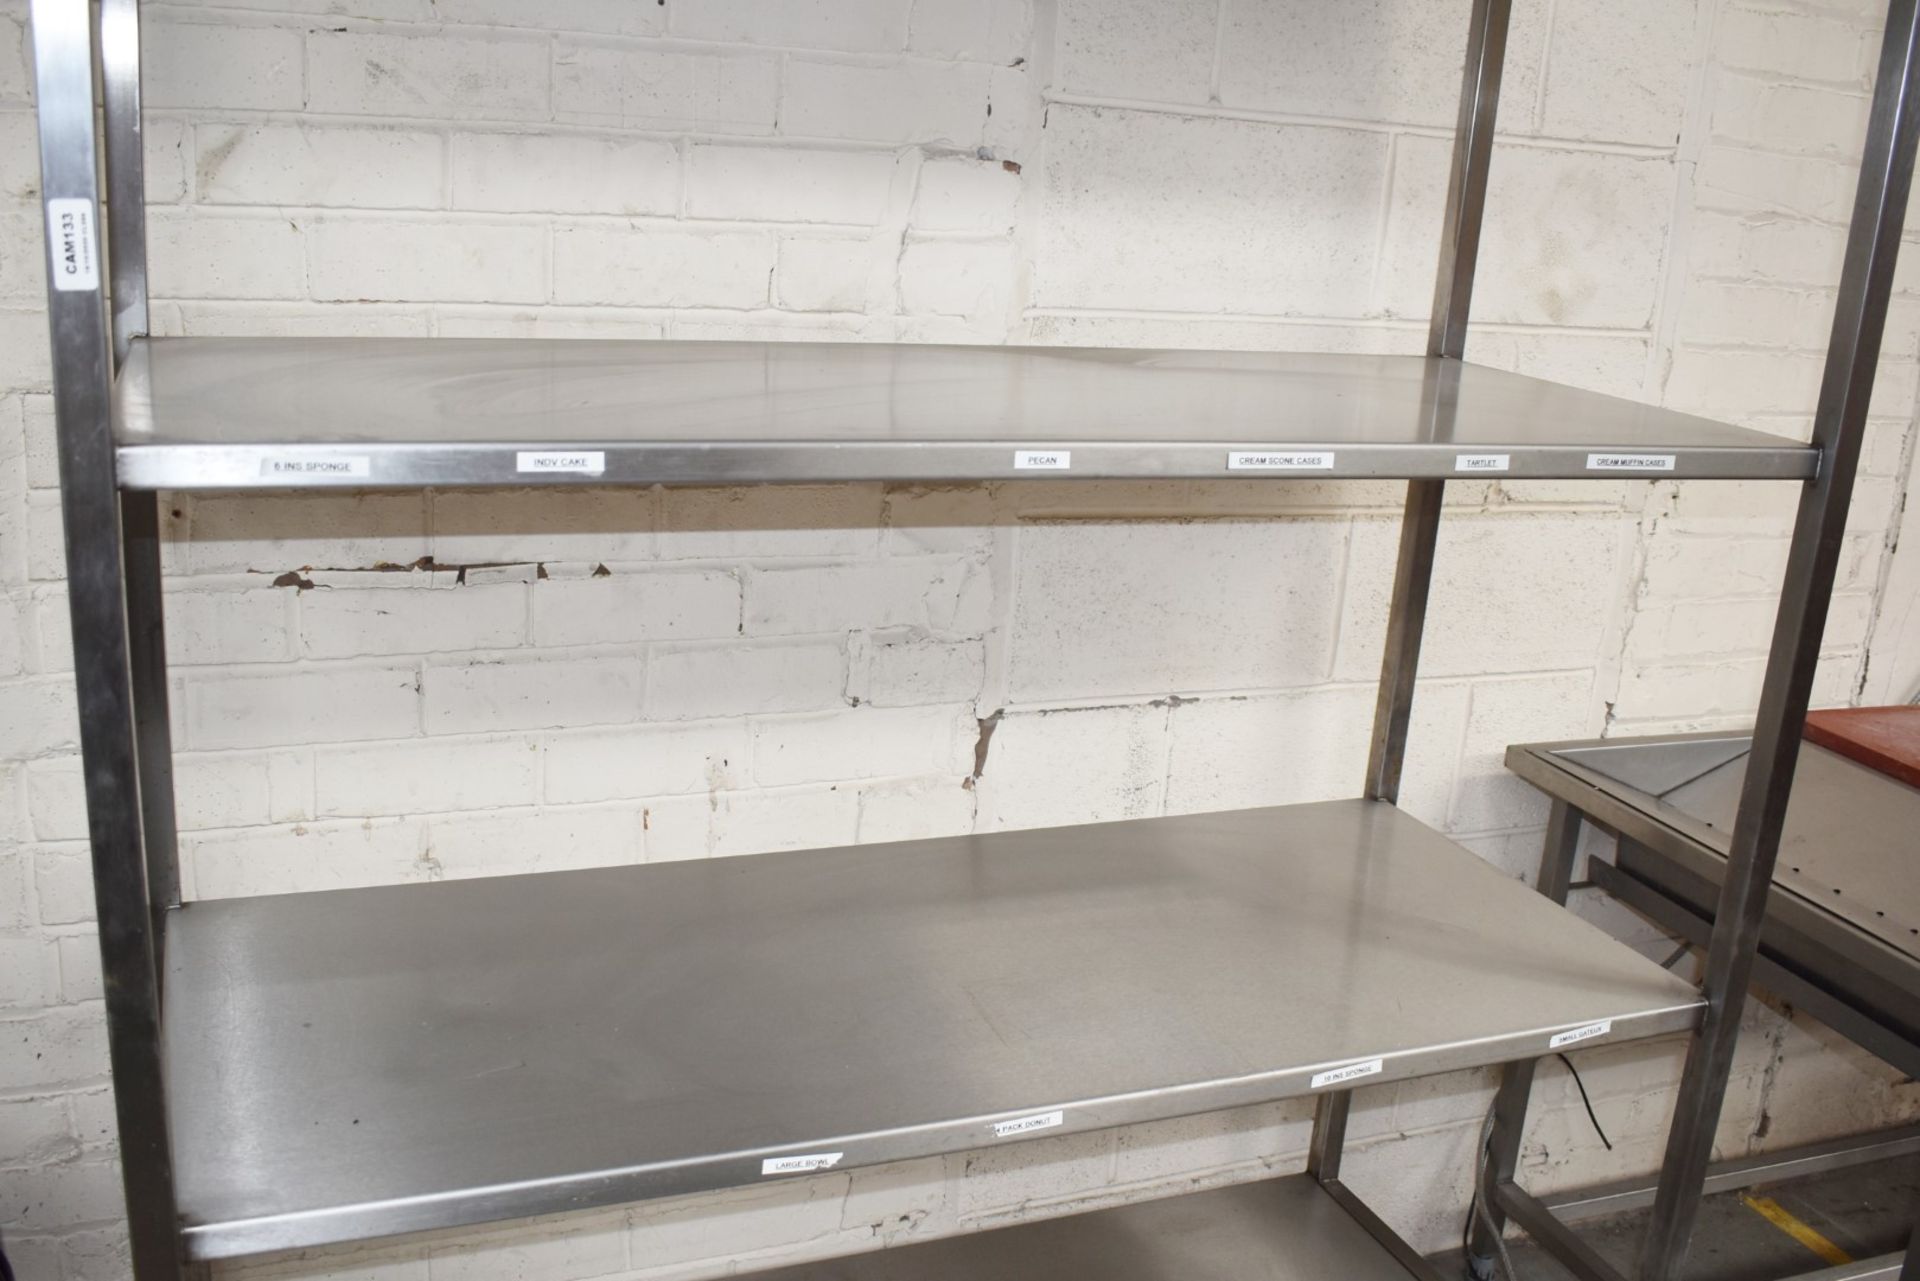 1 x Stainless Steel Commercial Kitchen 3 Tier Shelf Unit - Dimensions: H188 x W140 x D60 cms - - Image 3 of 4